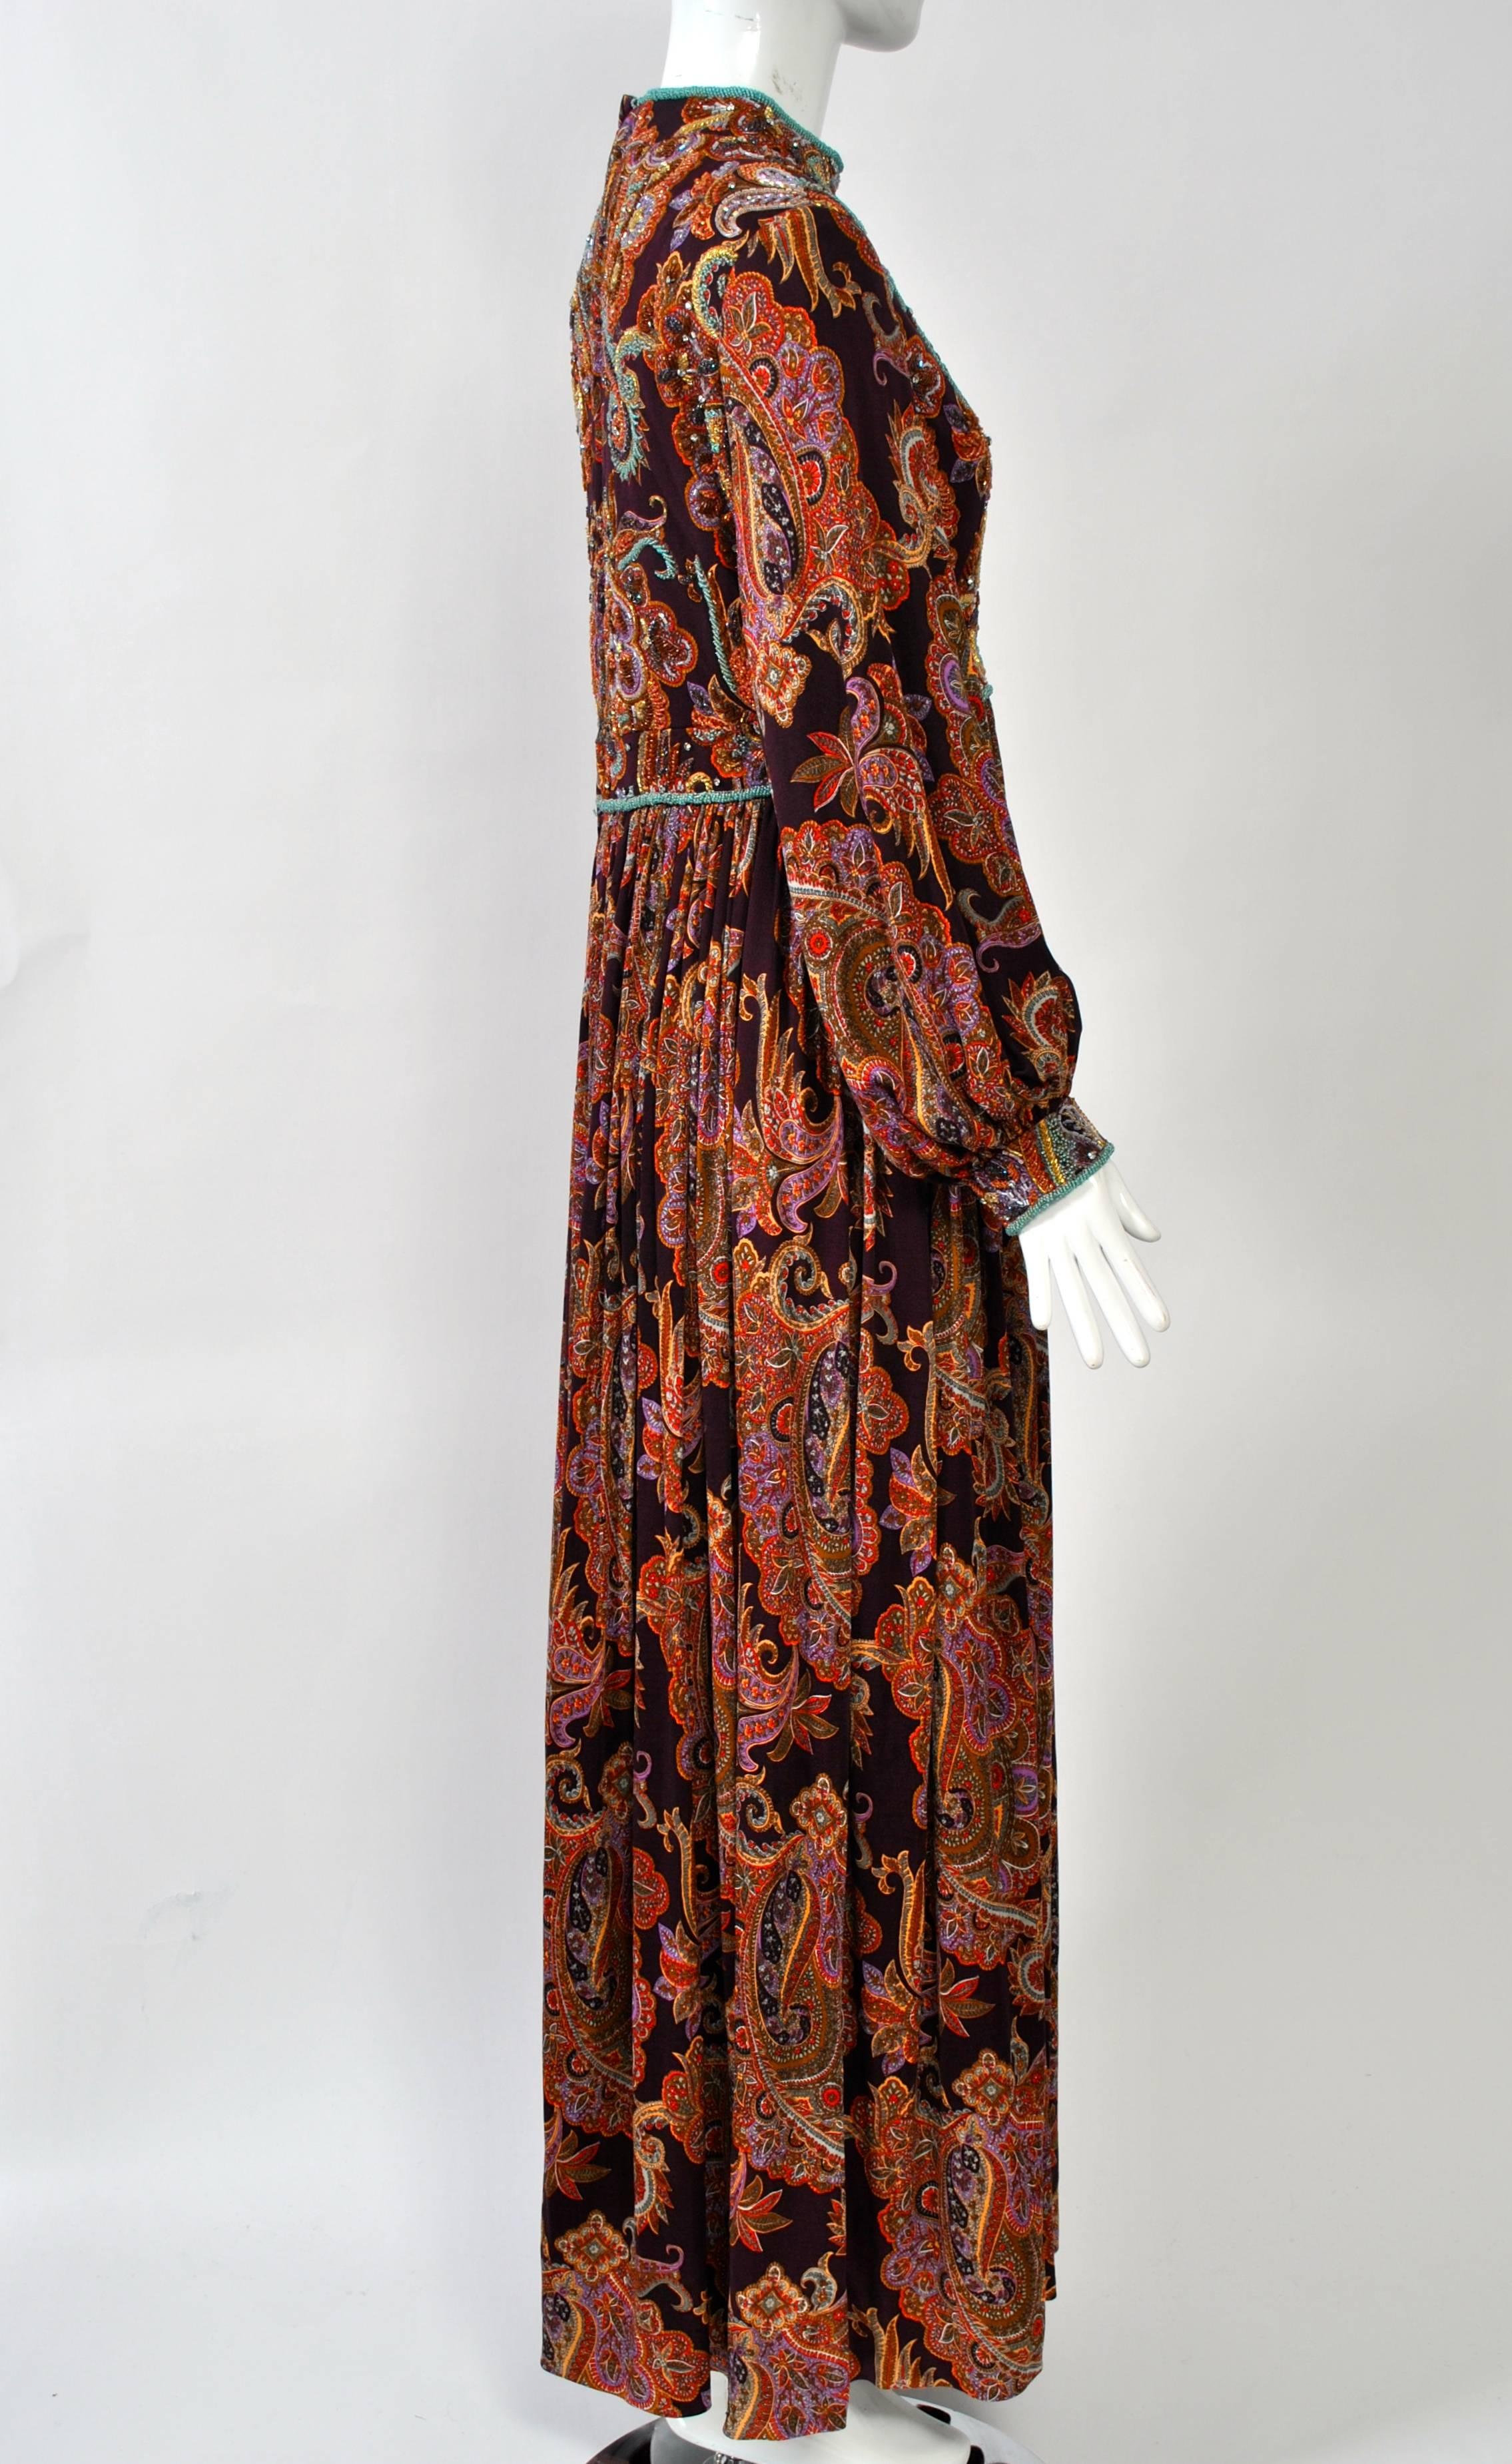 George Halley, who was admired for his evening wear, designed this long 1970s dress of richly colored paisley print with a brownish plum background that features beading on the bodice and wrists. The beading follows the lines of the paisley and is